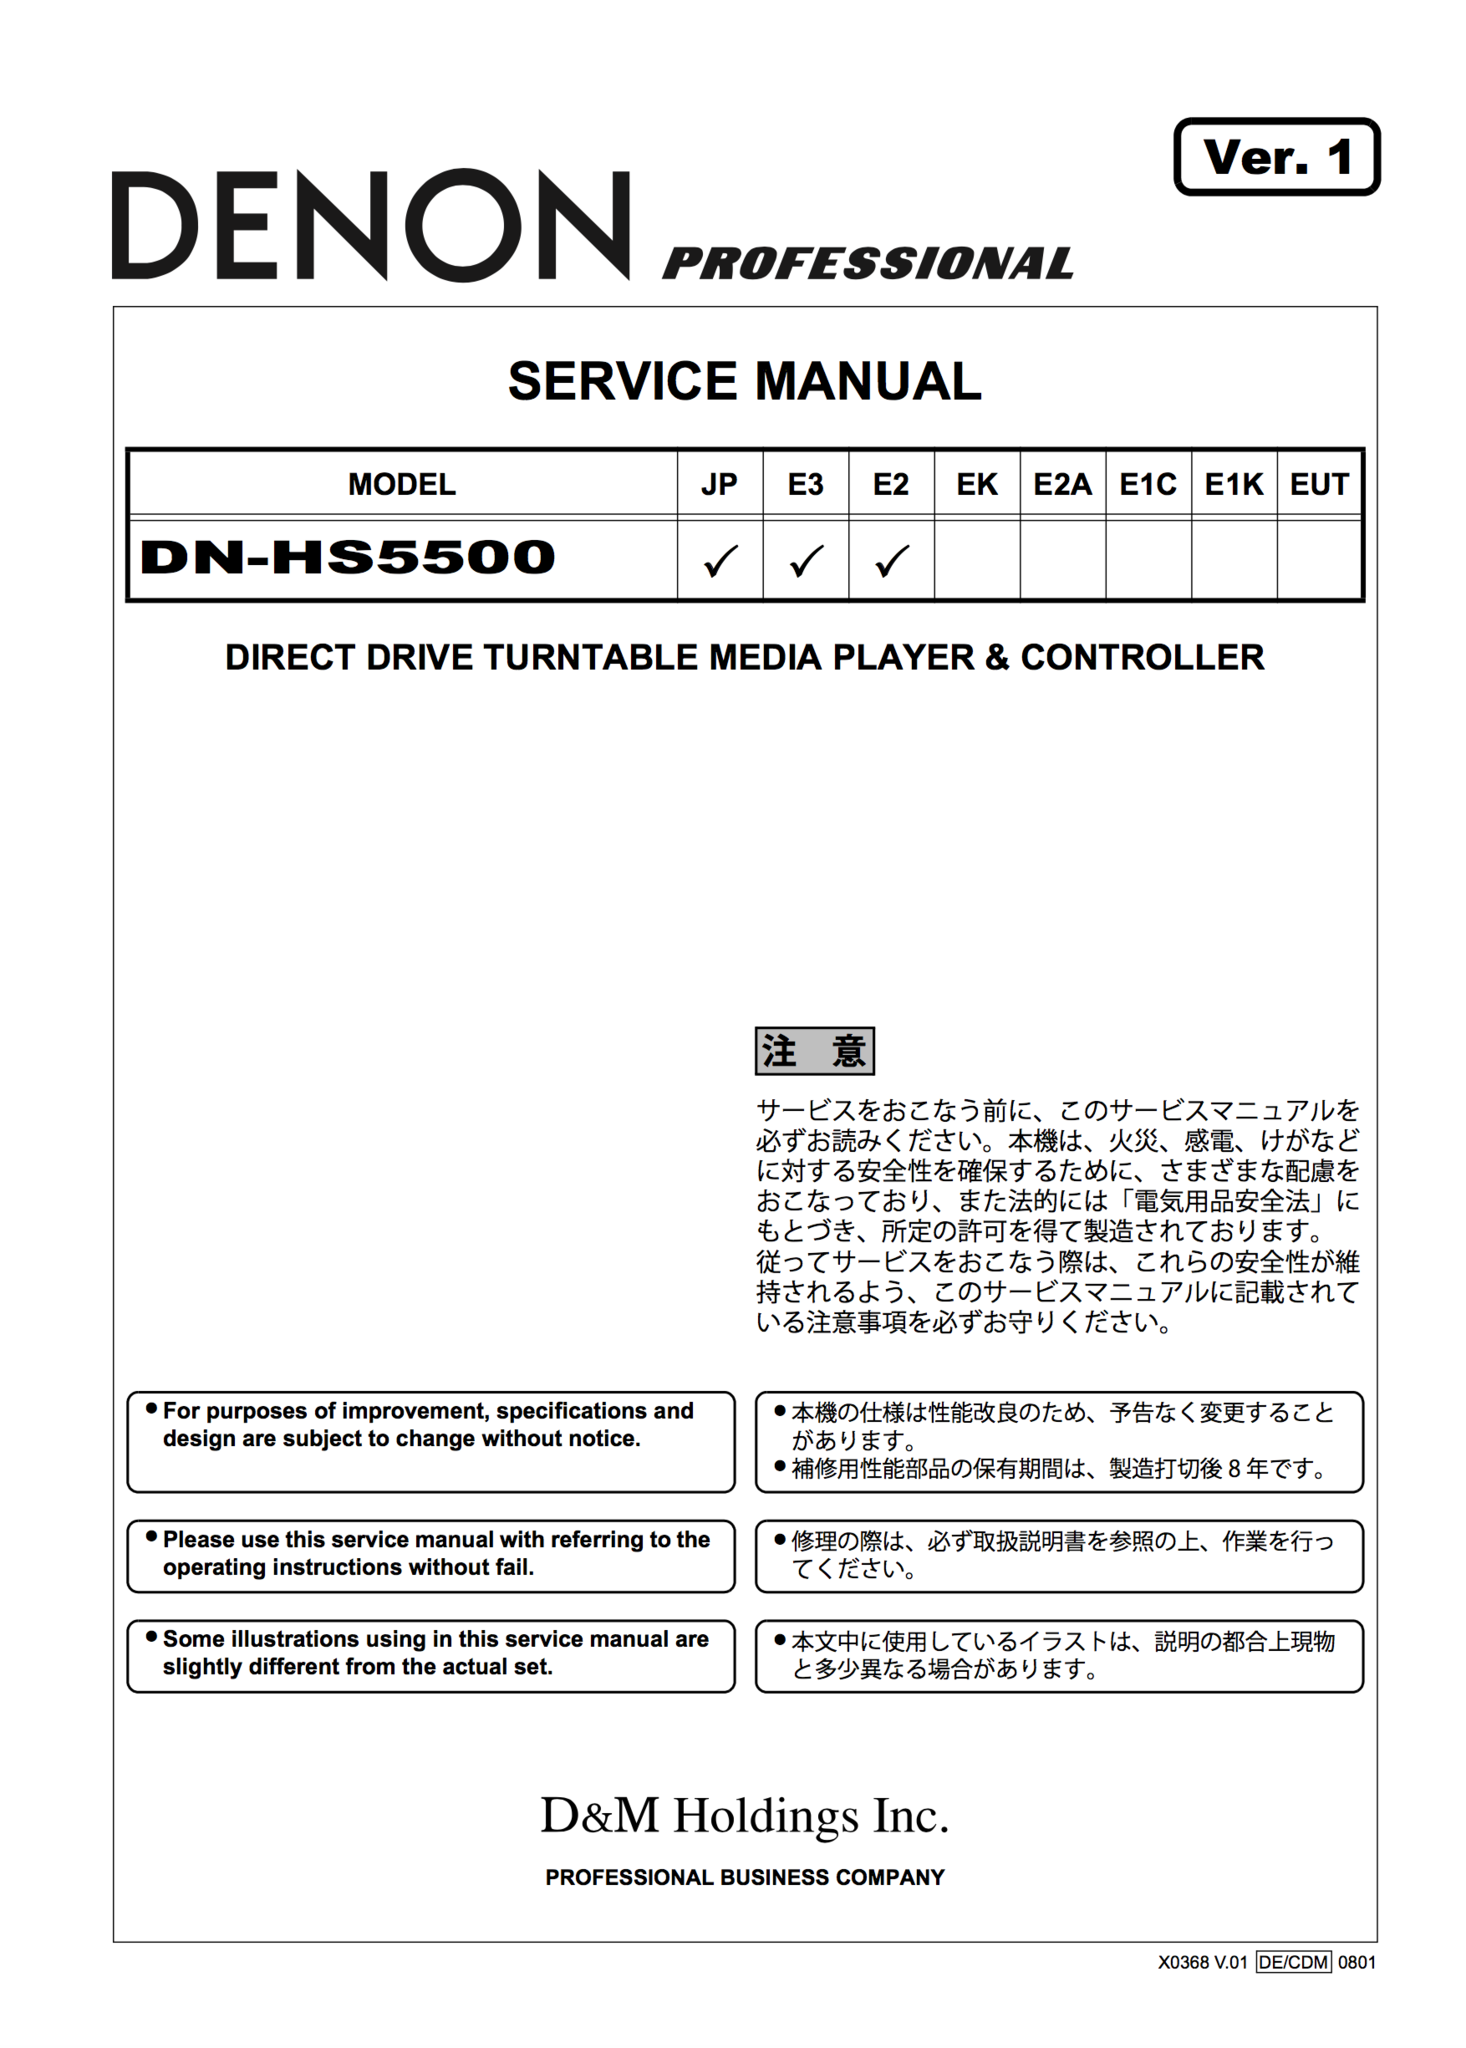 Denon Dn Hs5500 Service Manual Complete Spared Parts Uk 1062